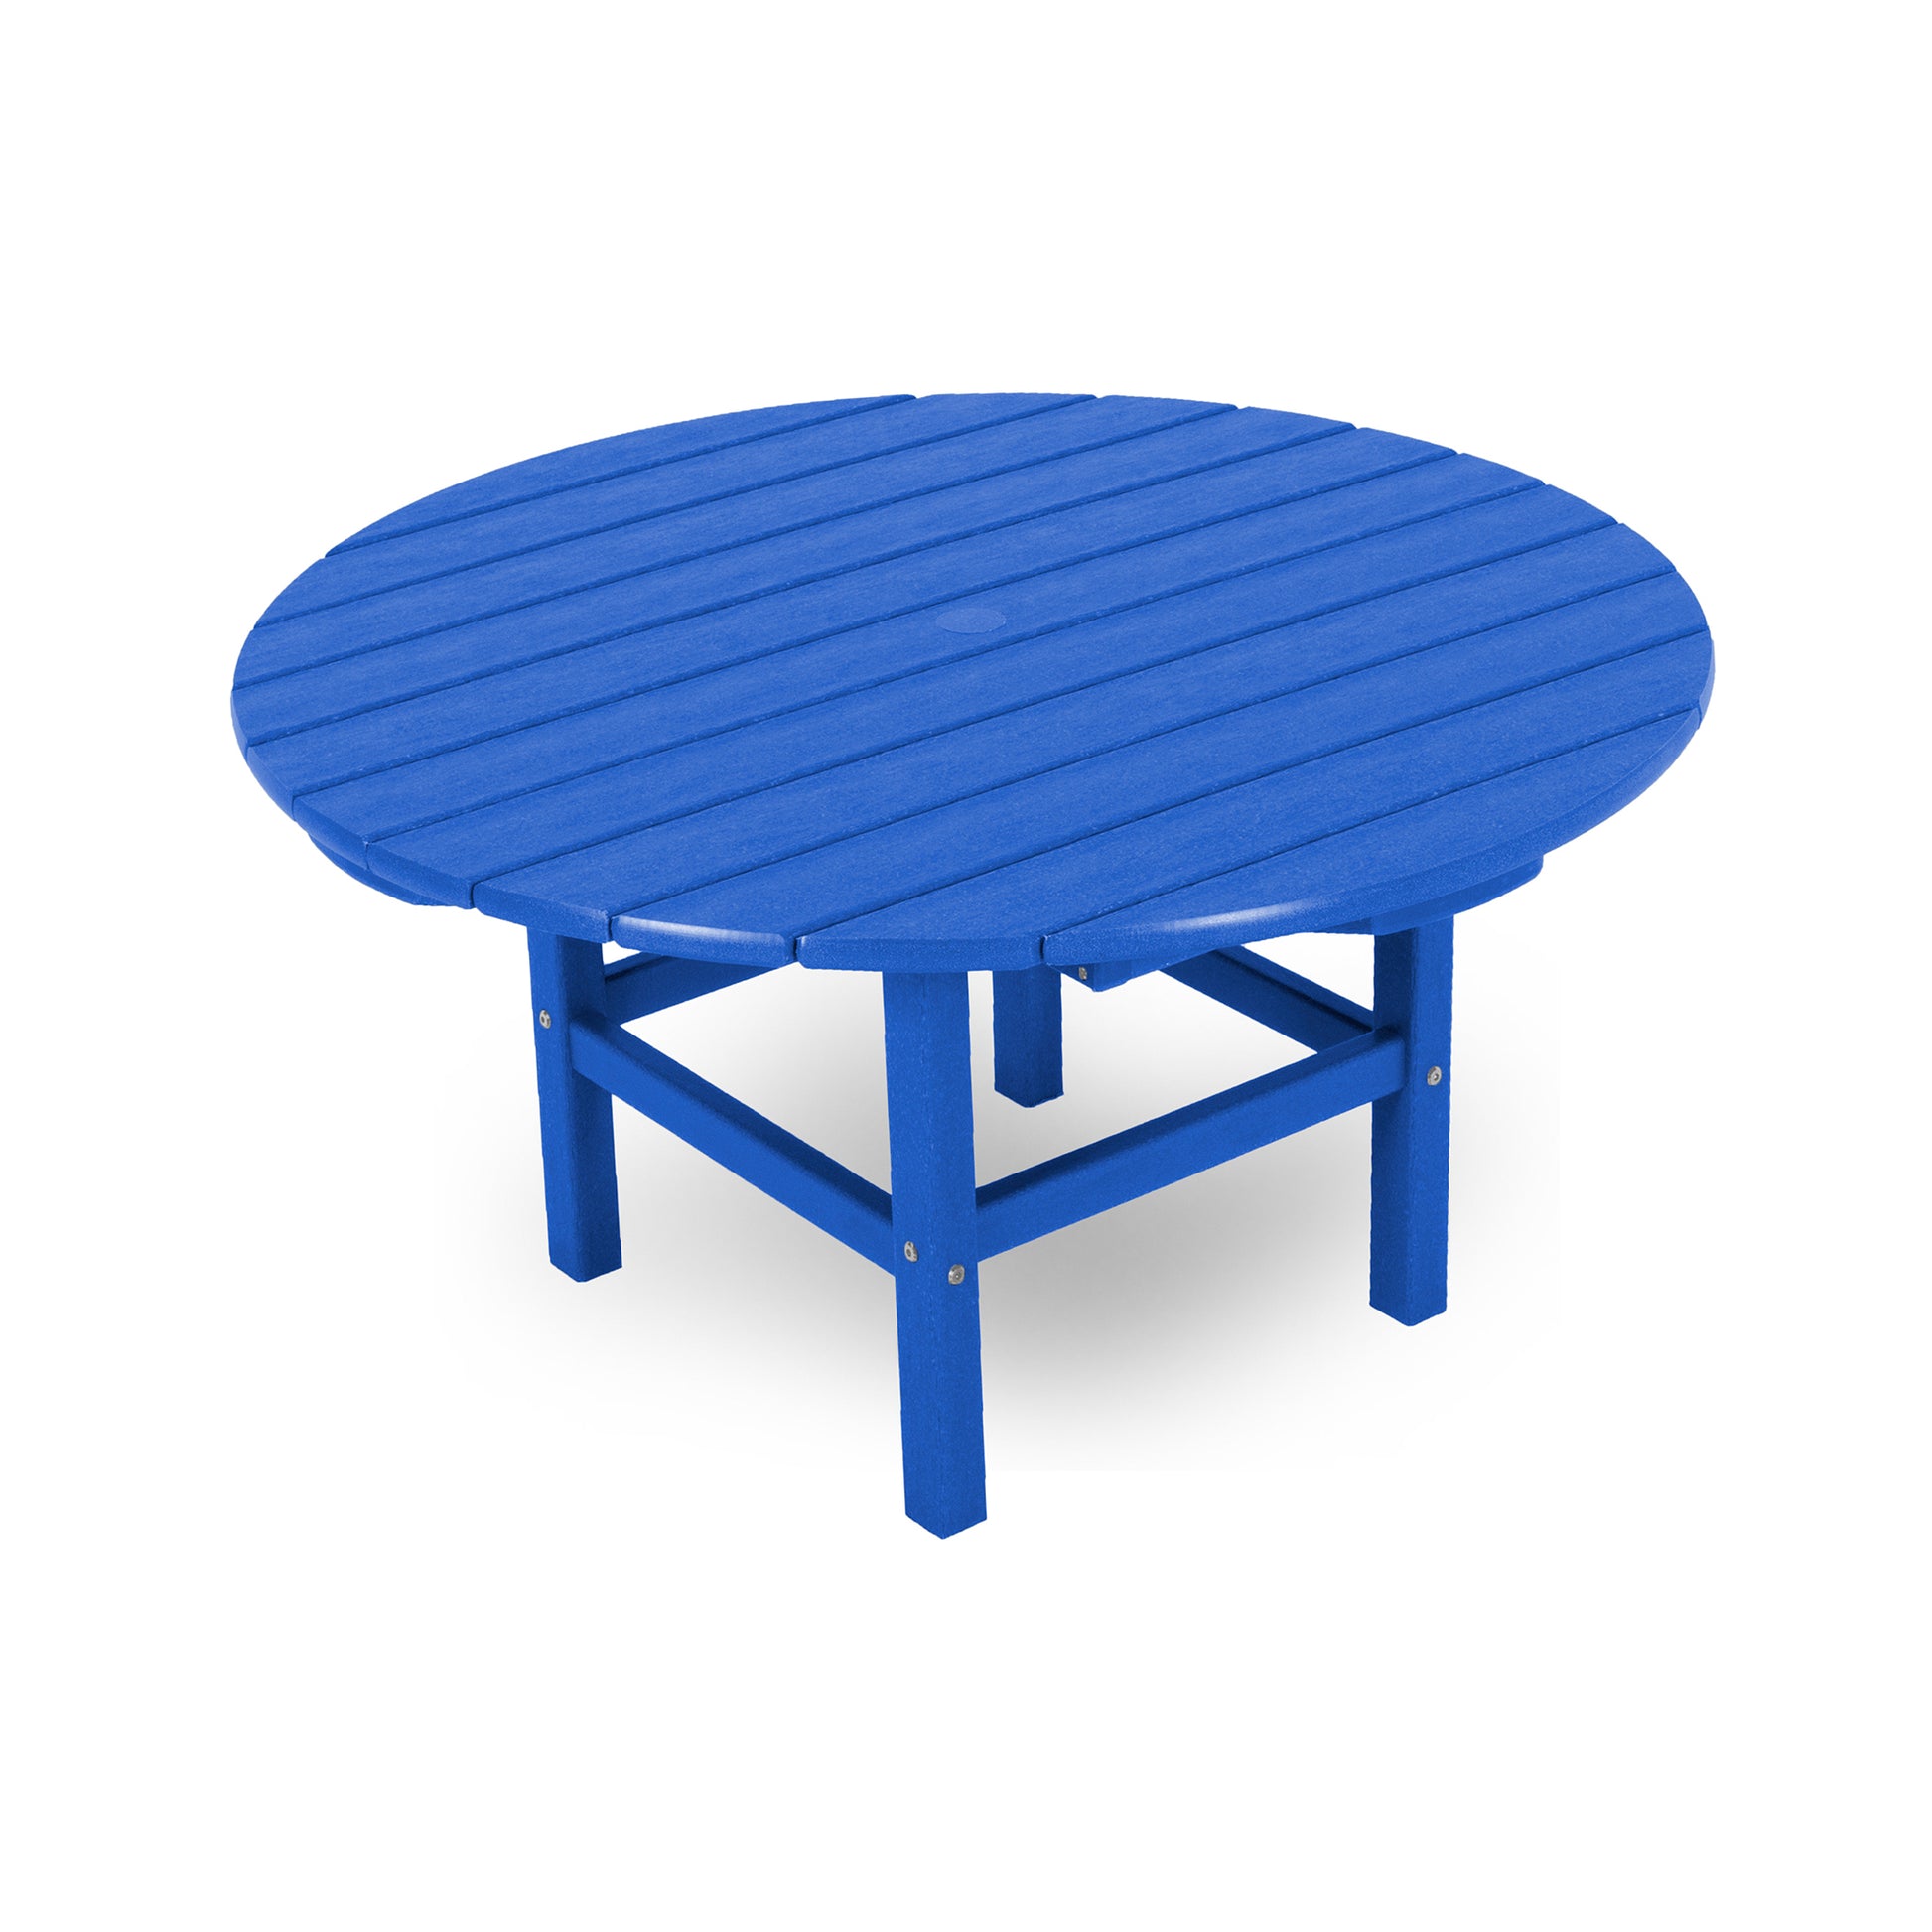 A round blue POLYWOOD Outdoor 38" Conversation Table with attached benches, isolated on a white background.